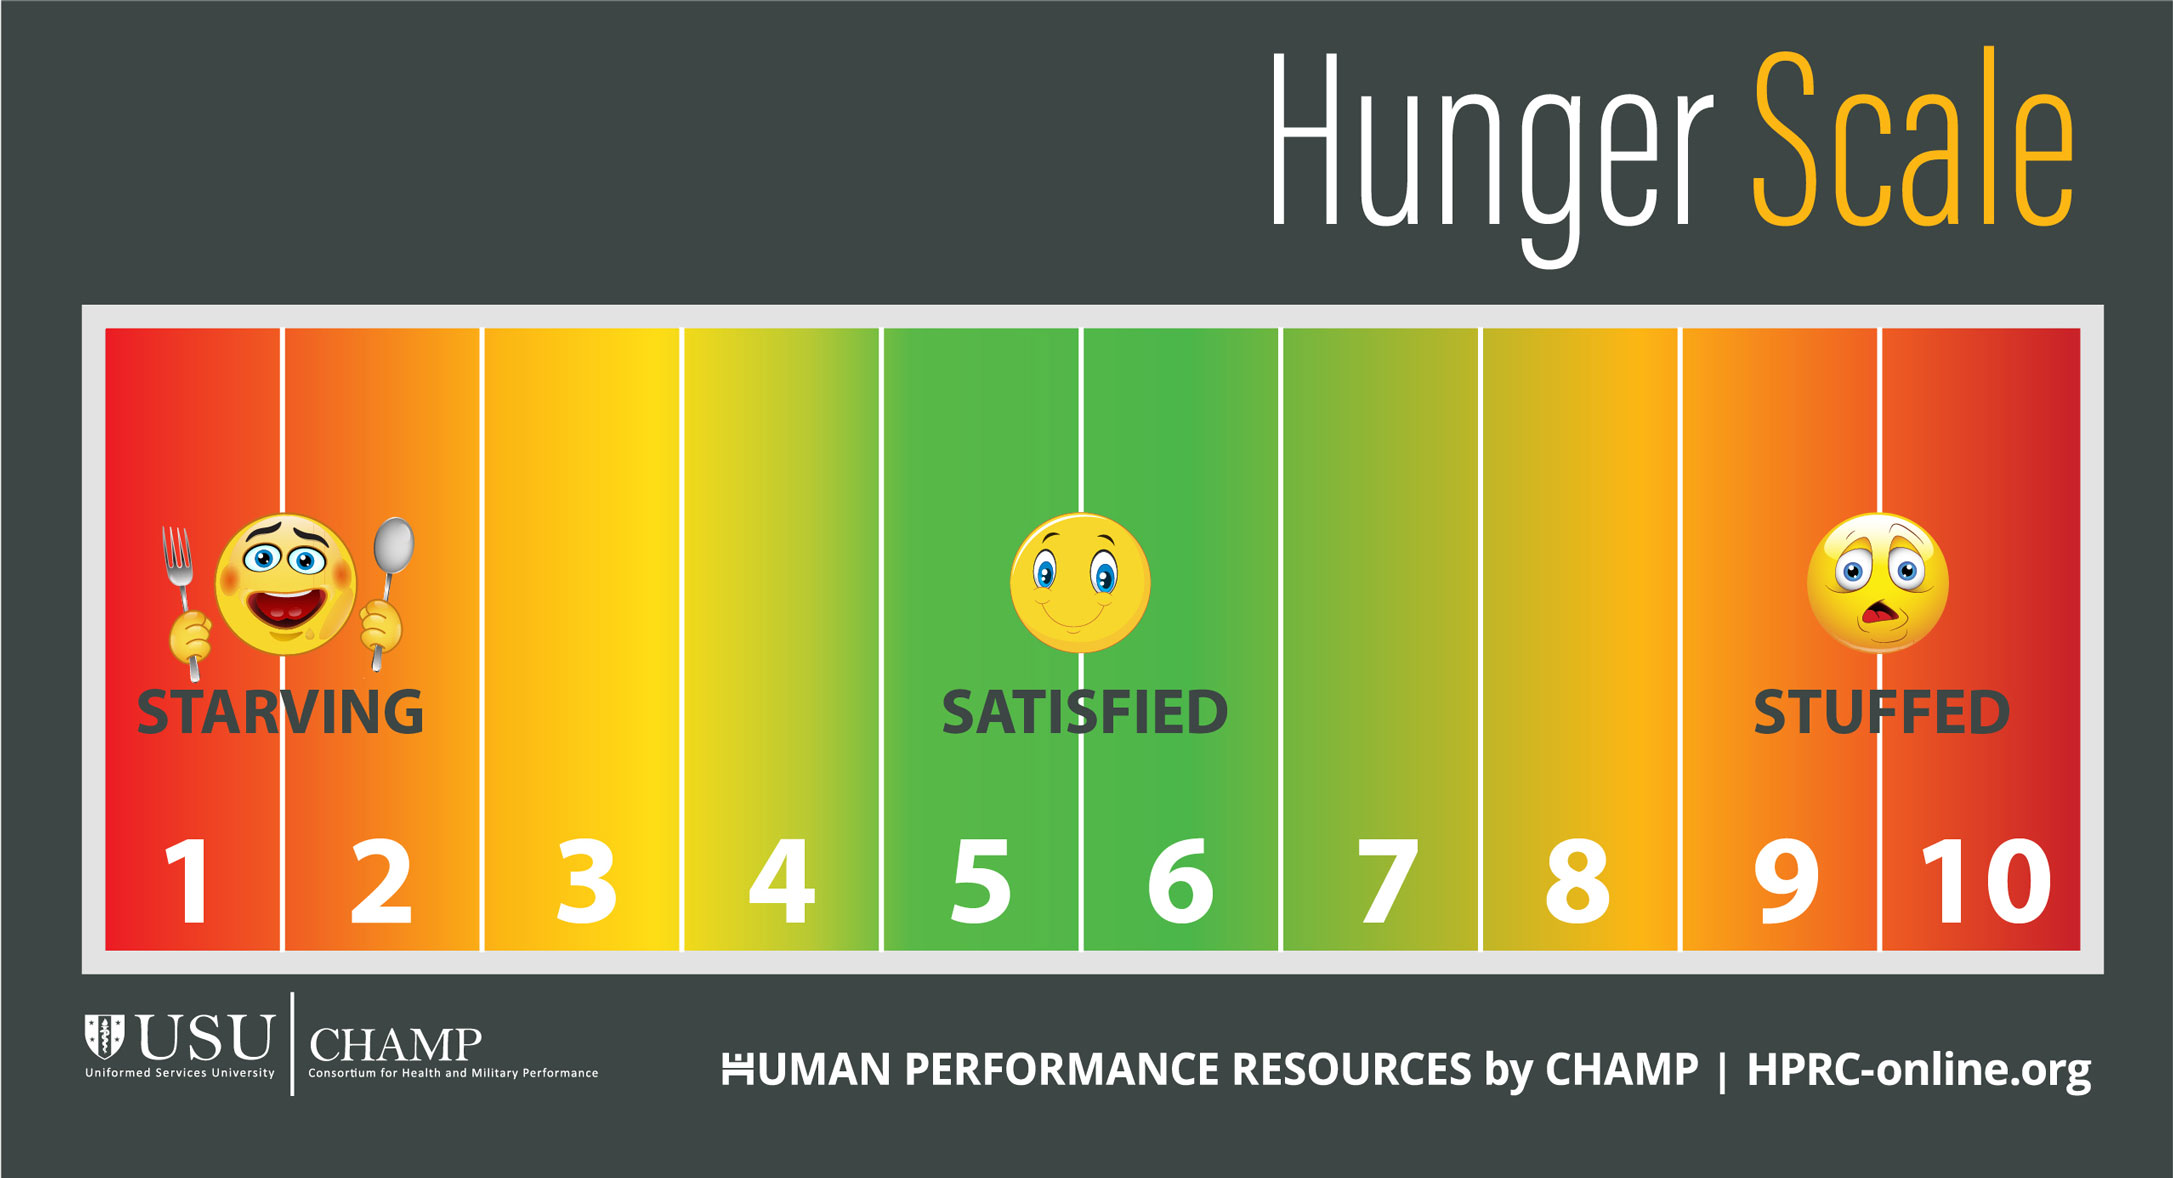 HPRC’s Hunger Scale tracks hunger and fullness on a scale from 1 to 10. A rating of 1 or 2 means you feel like you’re starving. A rating of 5 or 6 means you feel satisfied. A rating of 9 or 10 means you feel stuffed.